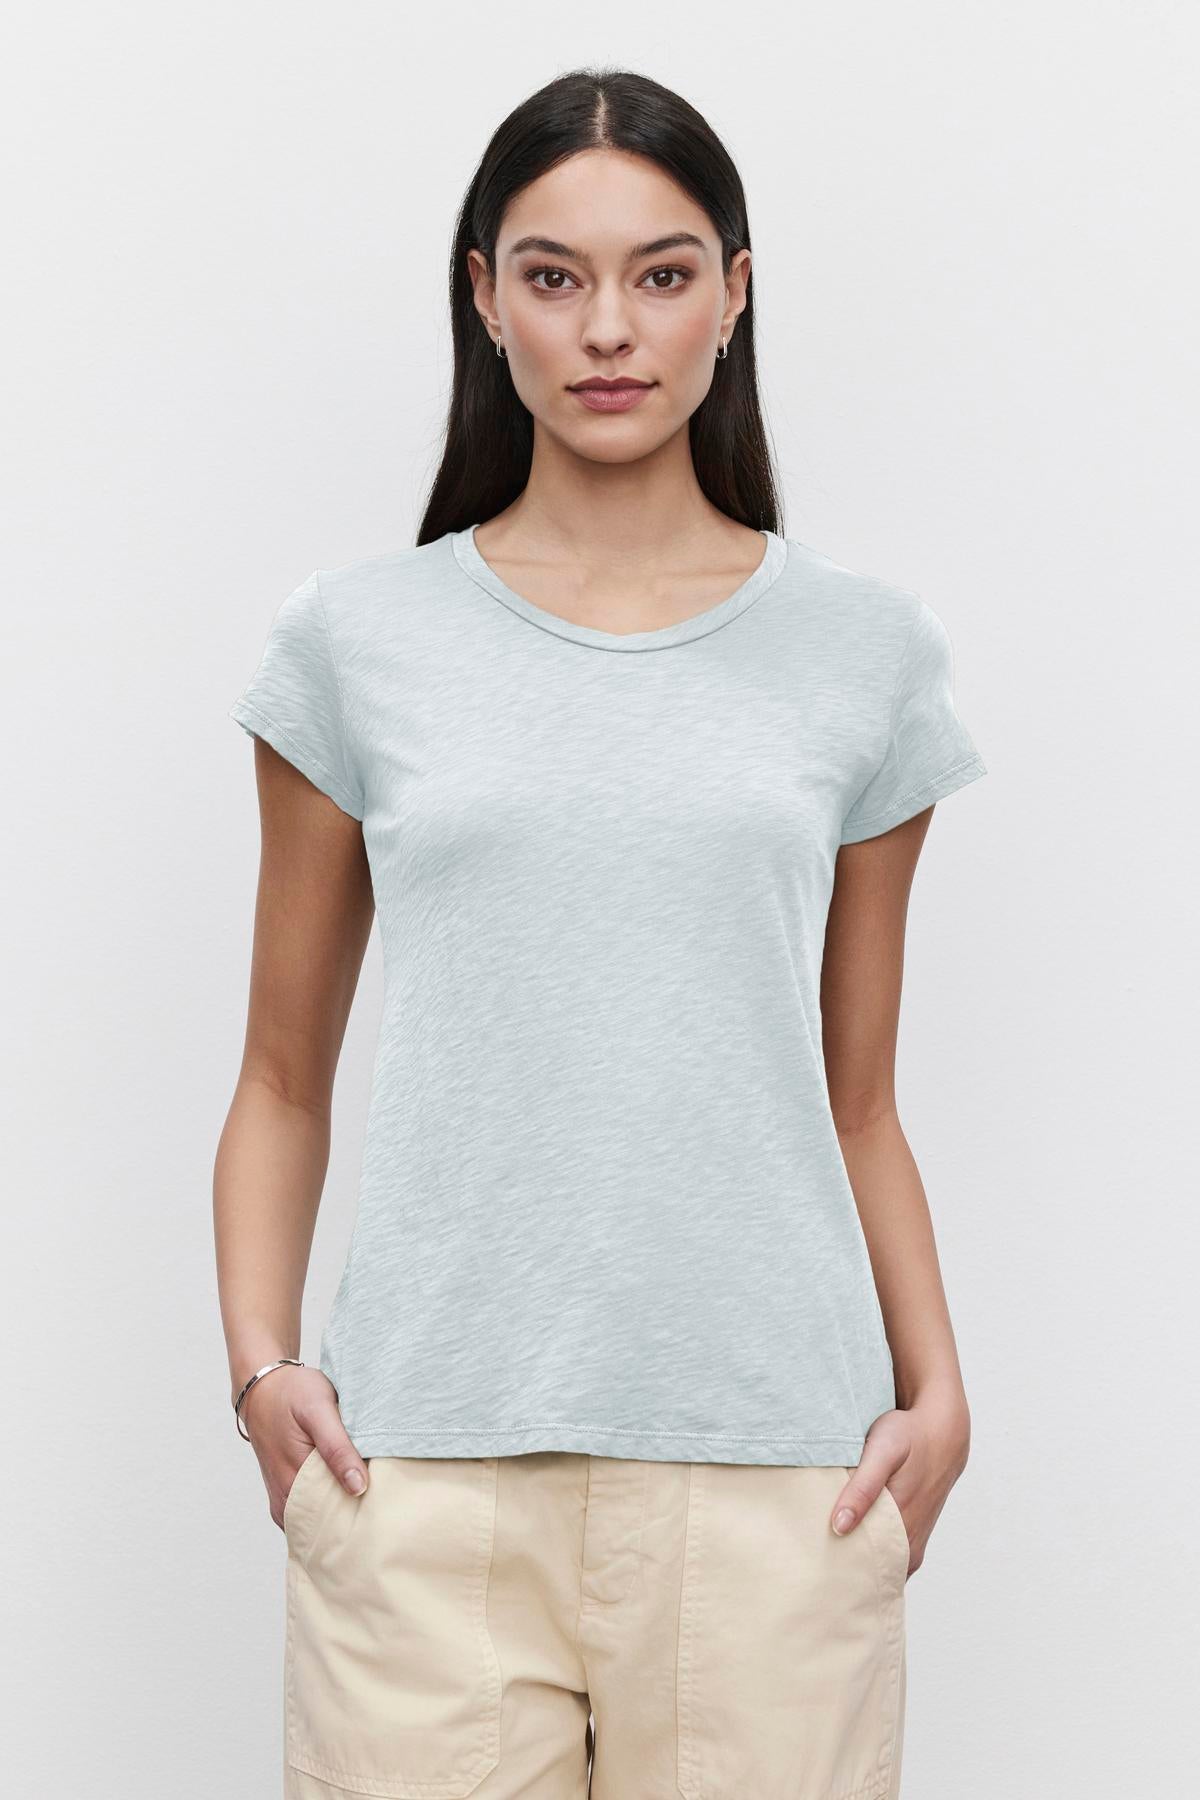 Young woman wearing a light blue Velvet by Graham & Spencer ODELIA COTTON SLUB CREW NECK TEE and beige pants, standing against a white background, looking directly at the camera.-36653432963265